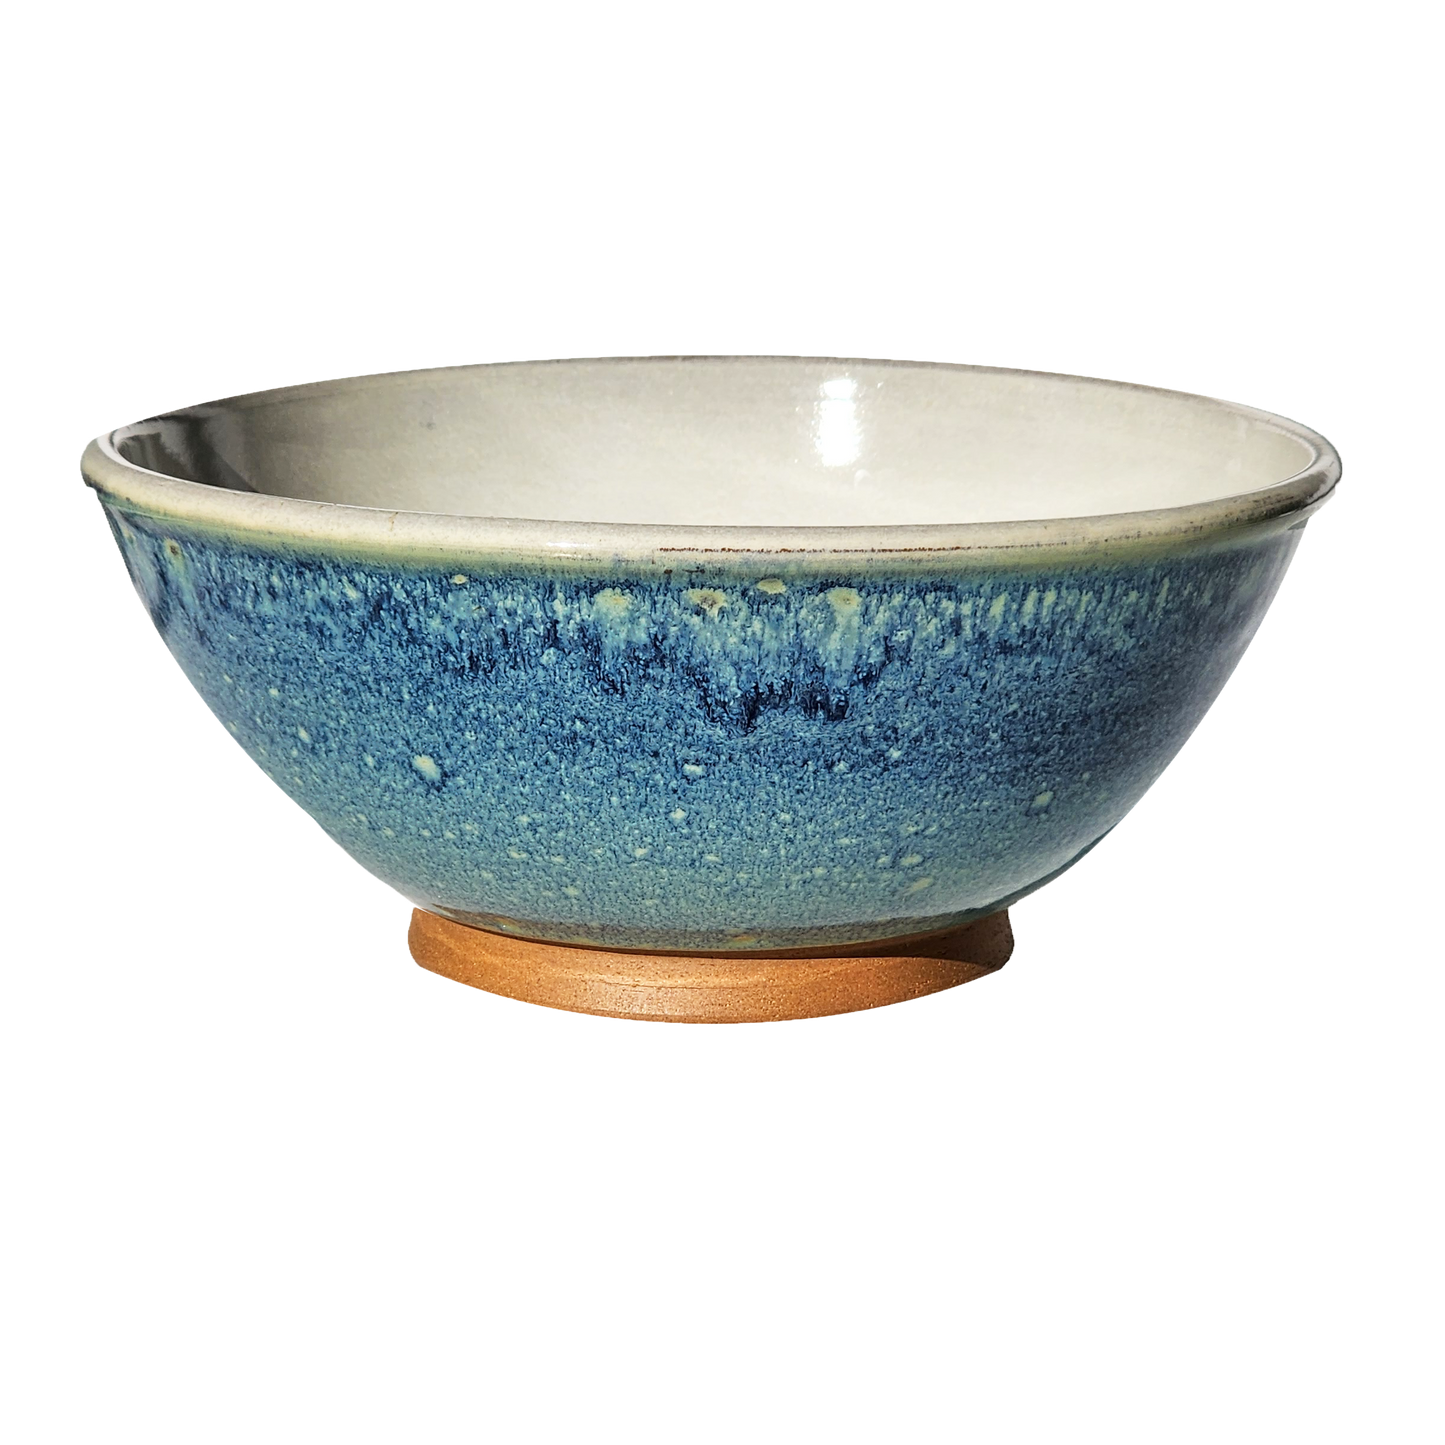 Image: A large mixing bowl in mesmerizing starry night blue, offering plenty of space with a capacity of 12.5 cups. Add a touch of celestial beauty to your kitchen décor.